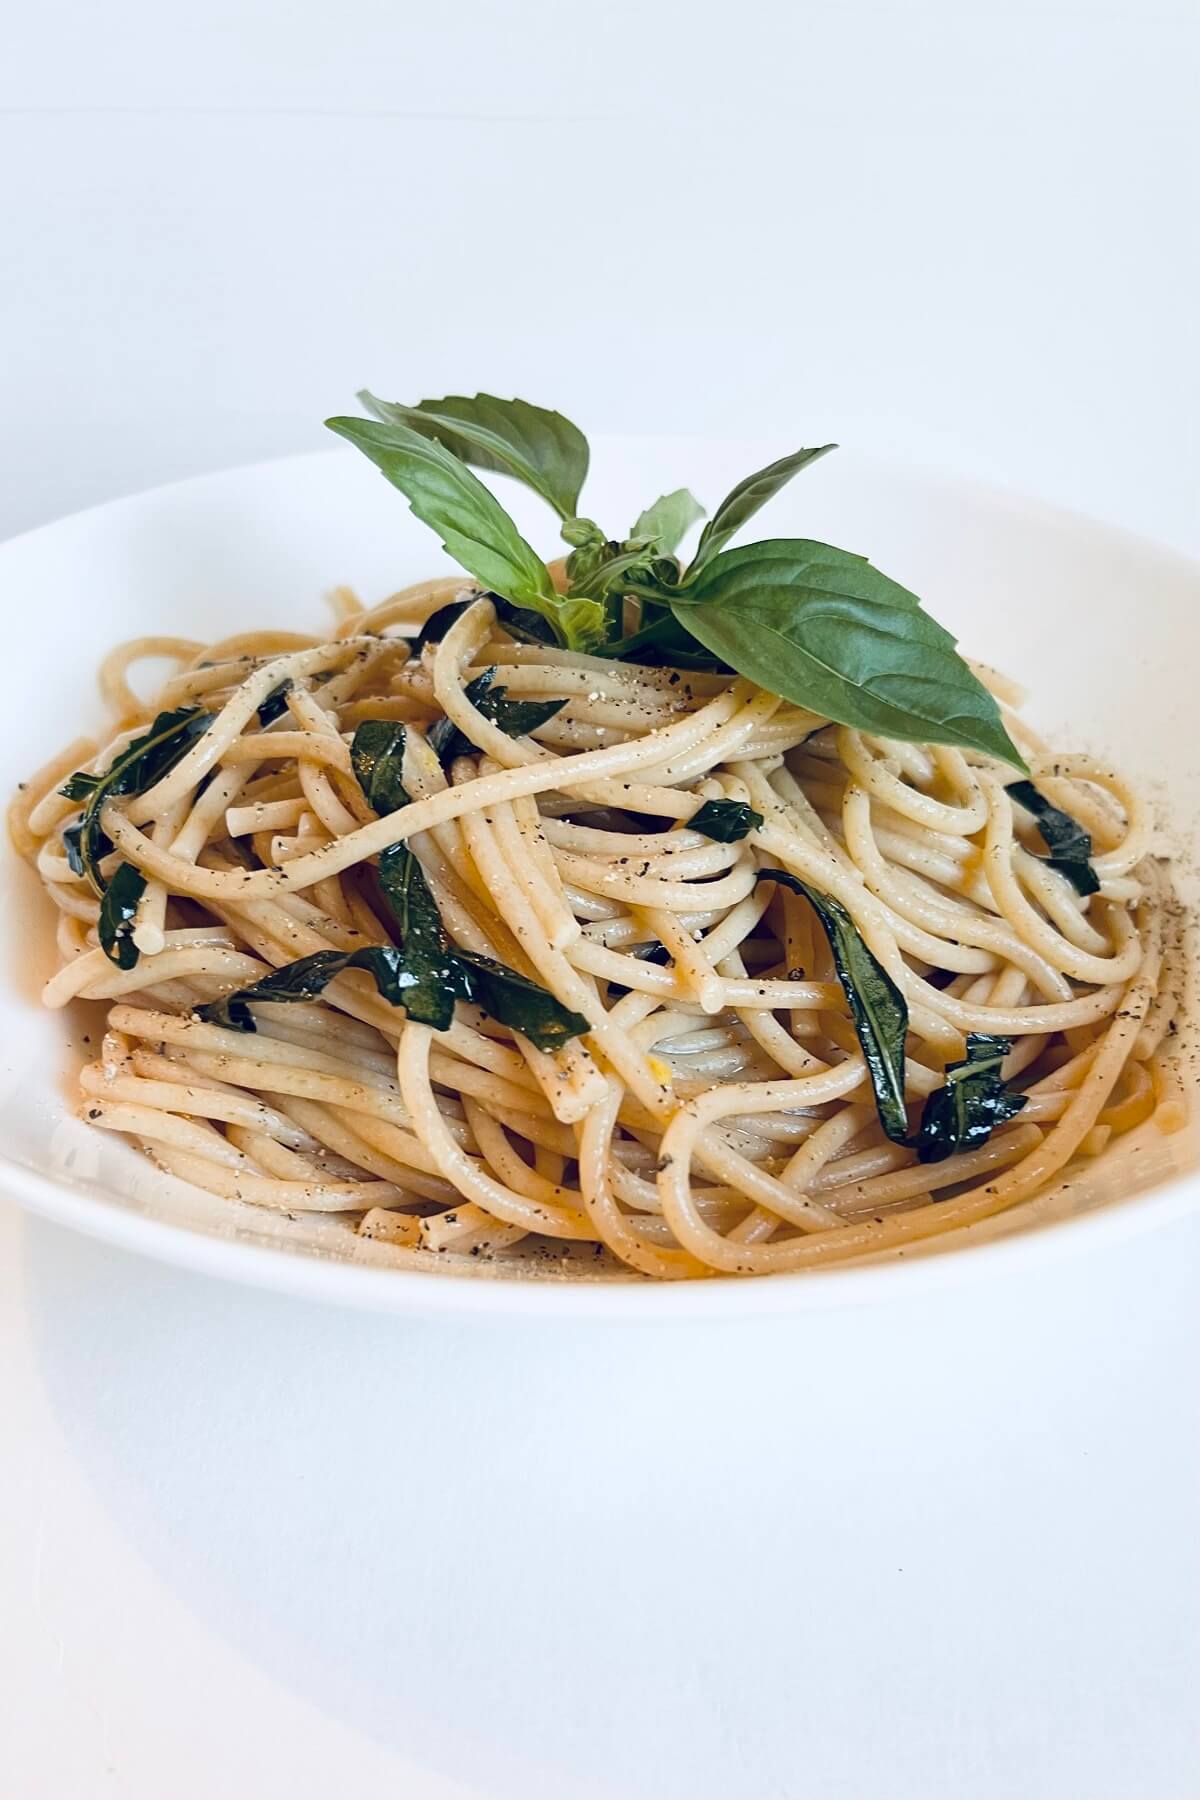 A bowl filled with pasta garnished with a sprig of basil.